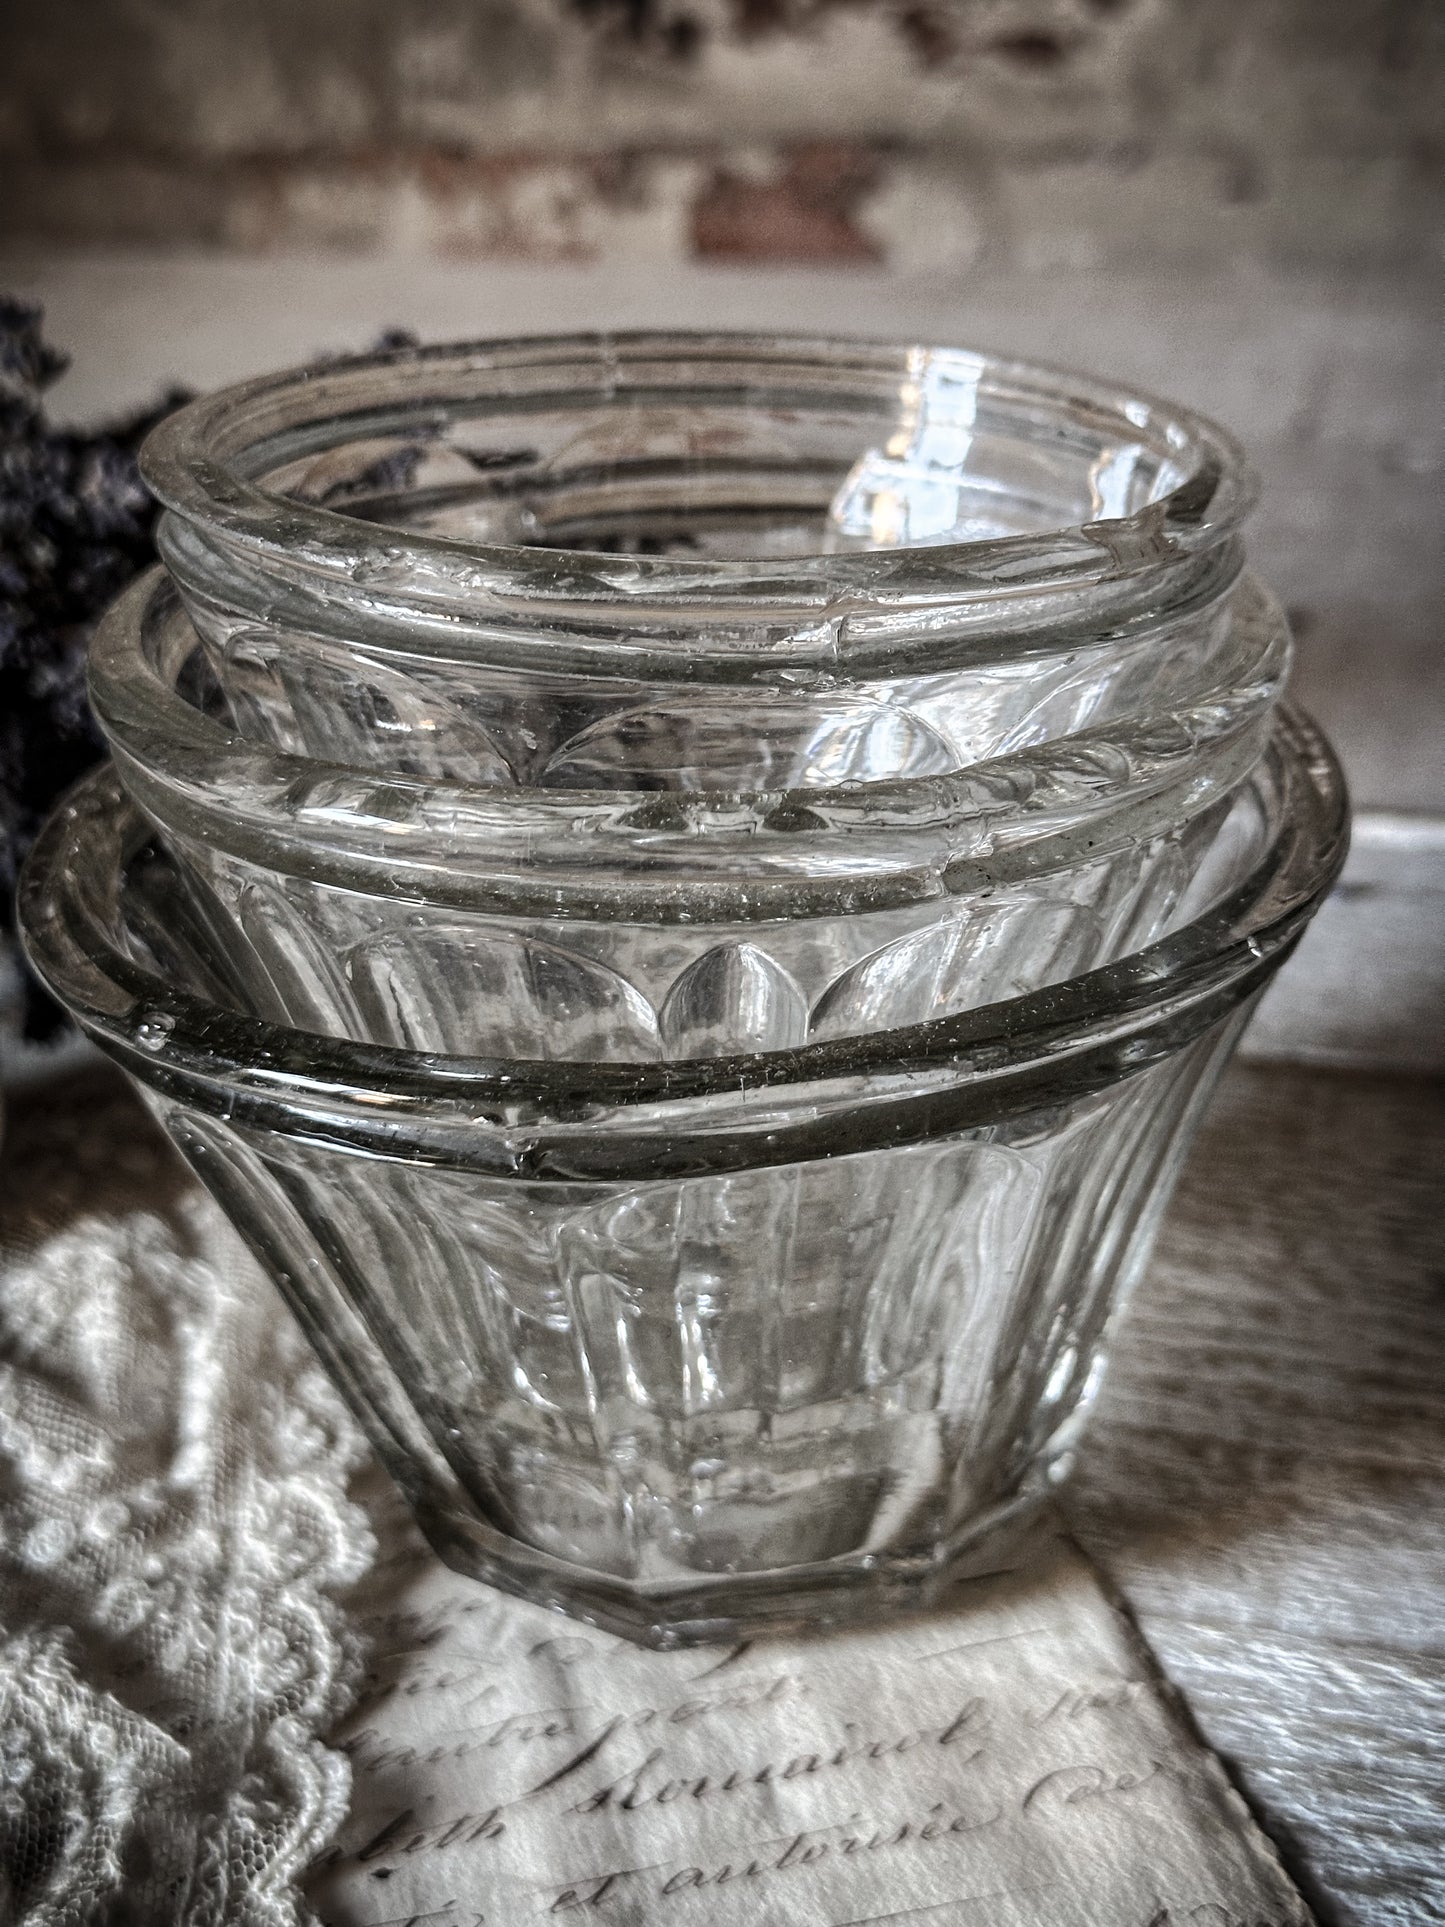 A beautiful French conical confiture jar #7